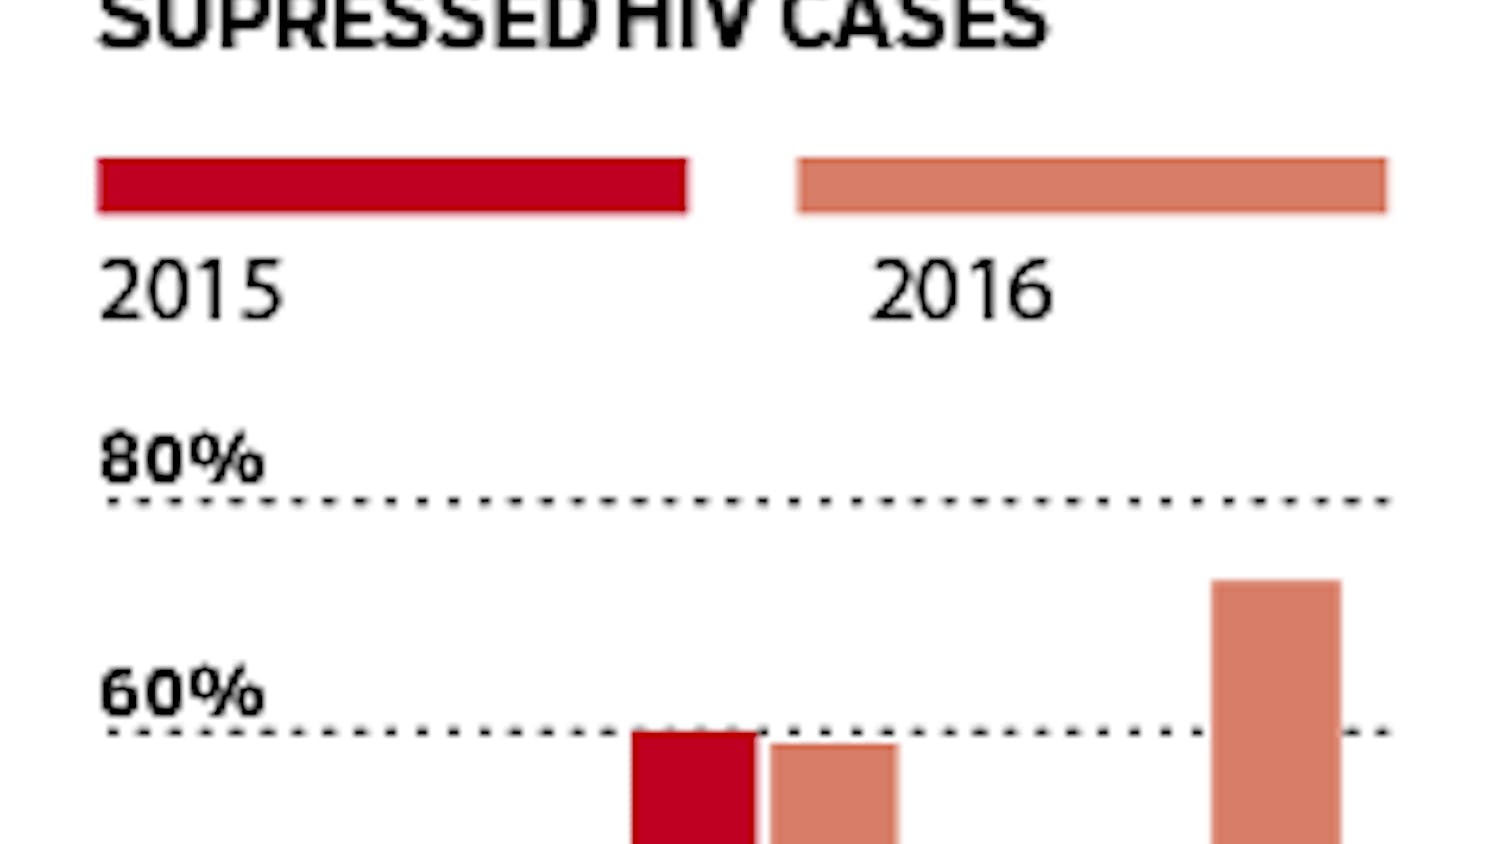 Percent of virally surpassed HIV cases